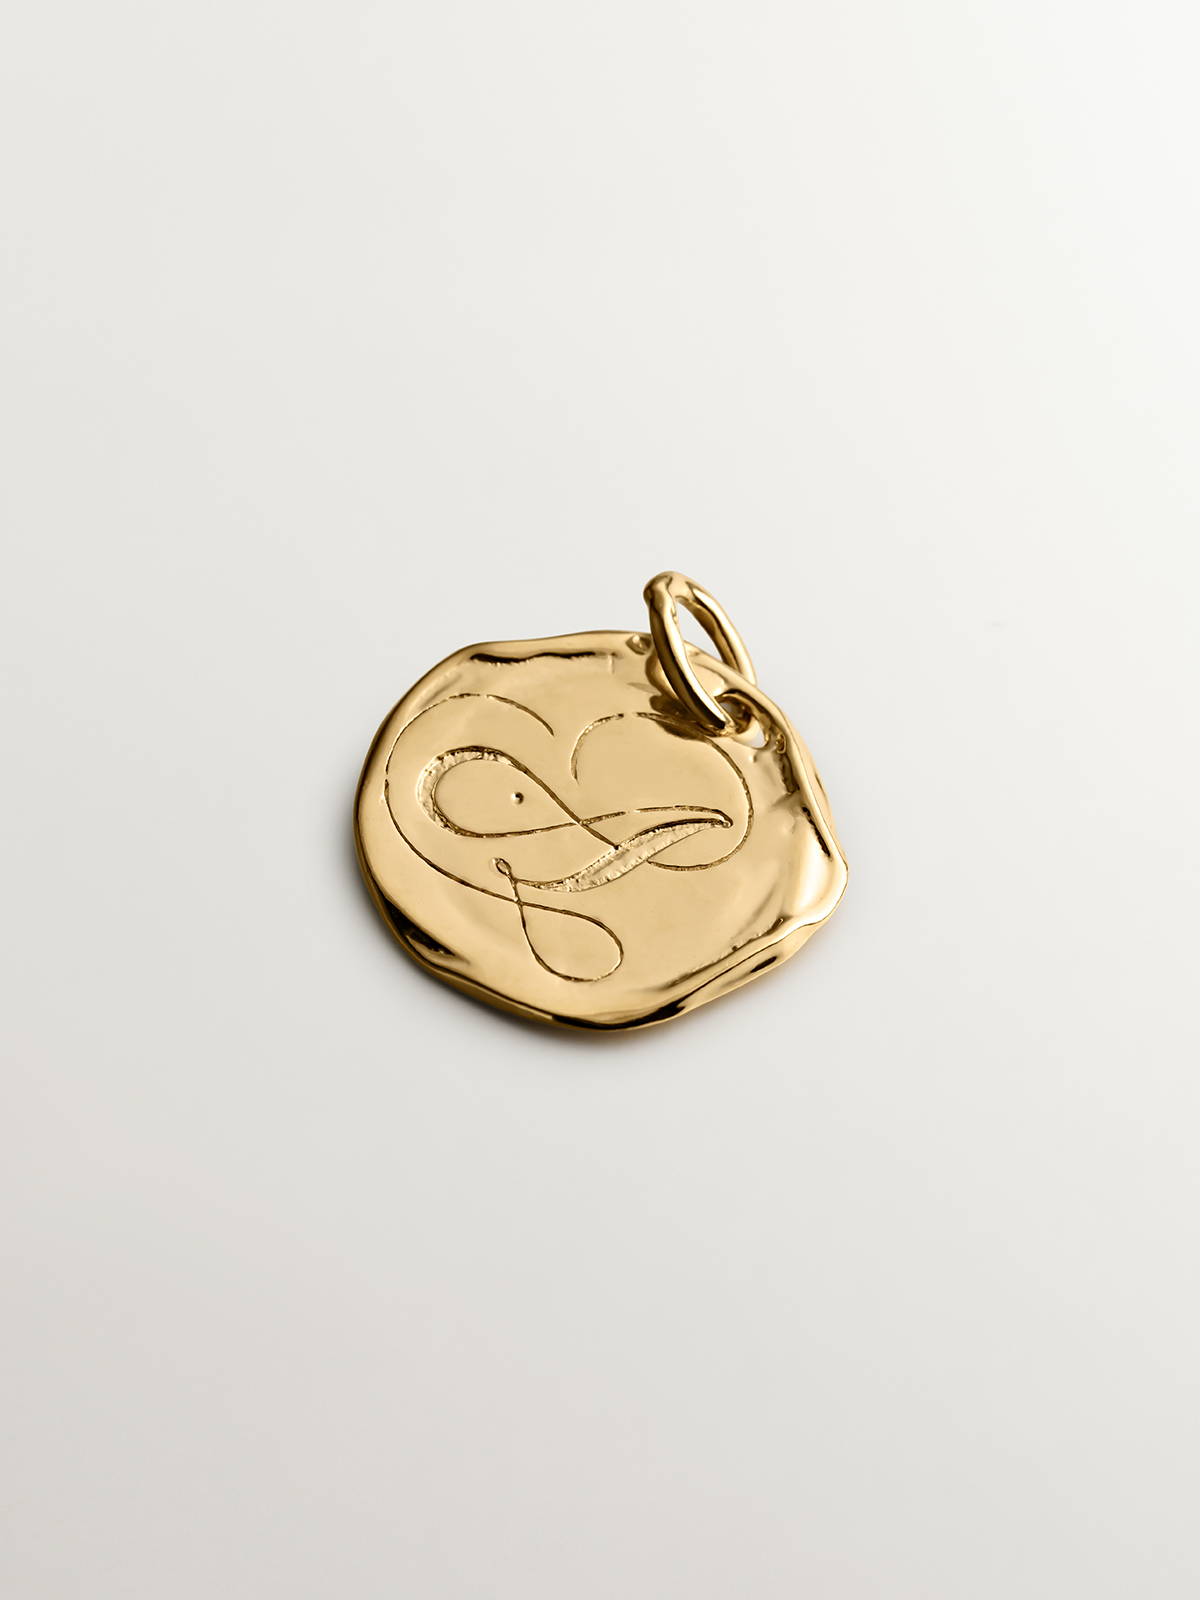 Handcrafted 925 silver charm bathed in 18K yellow gold with initial A.